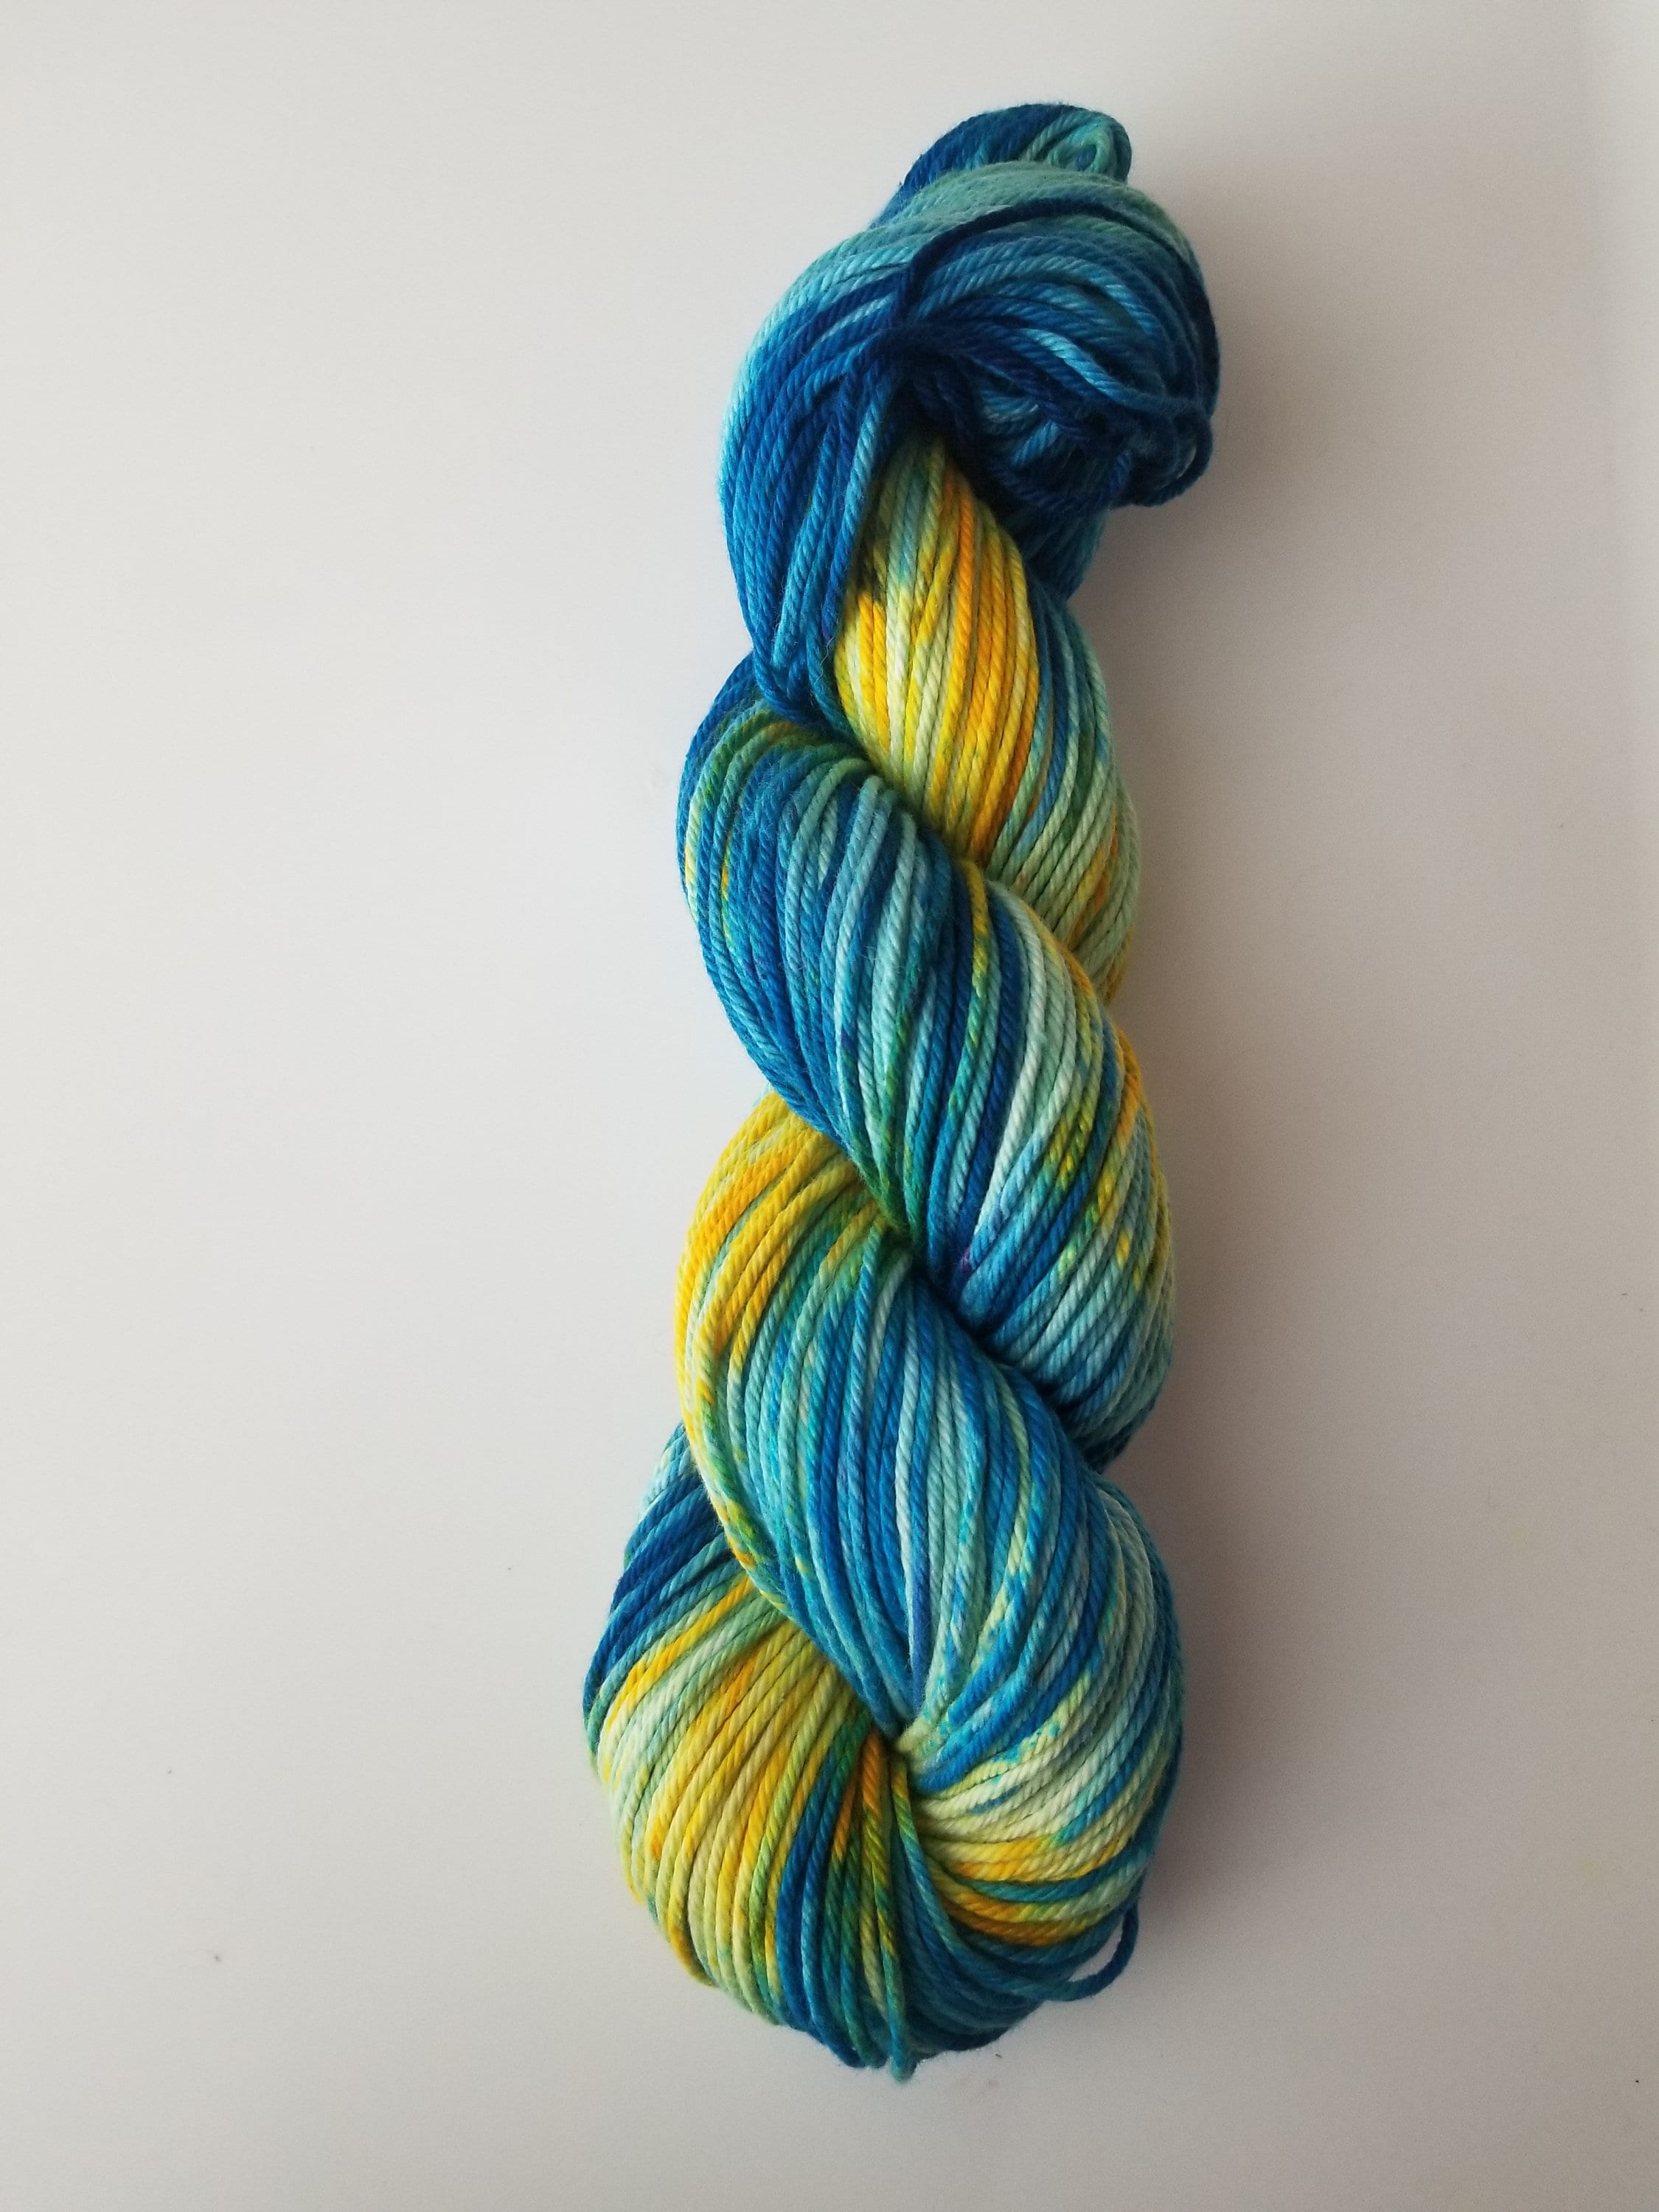 Rio- 100% Organic Cotton, Hand Dyed, Bulky Weight, Variegated, Speckled Yarn